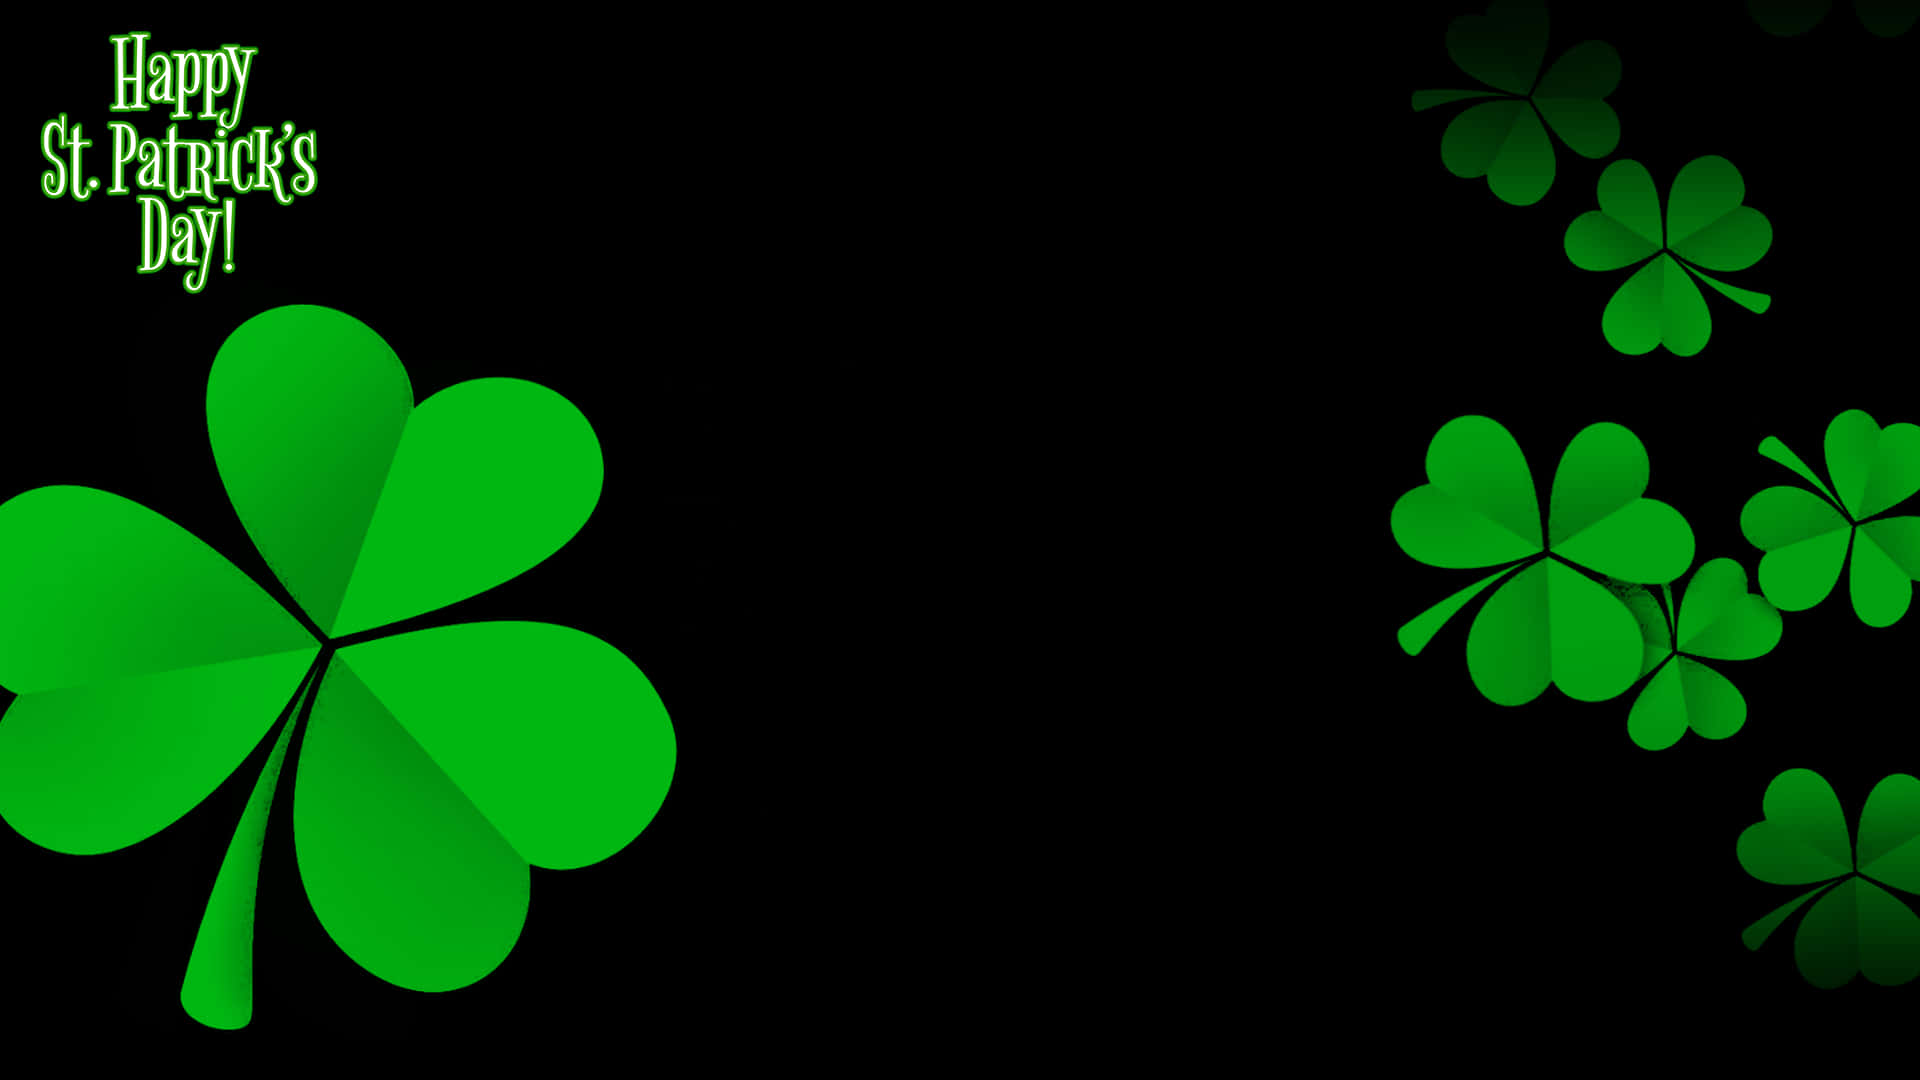 St. Patrick's Day 2023 Images & HD Wallpapers for Free Download